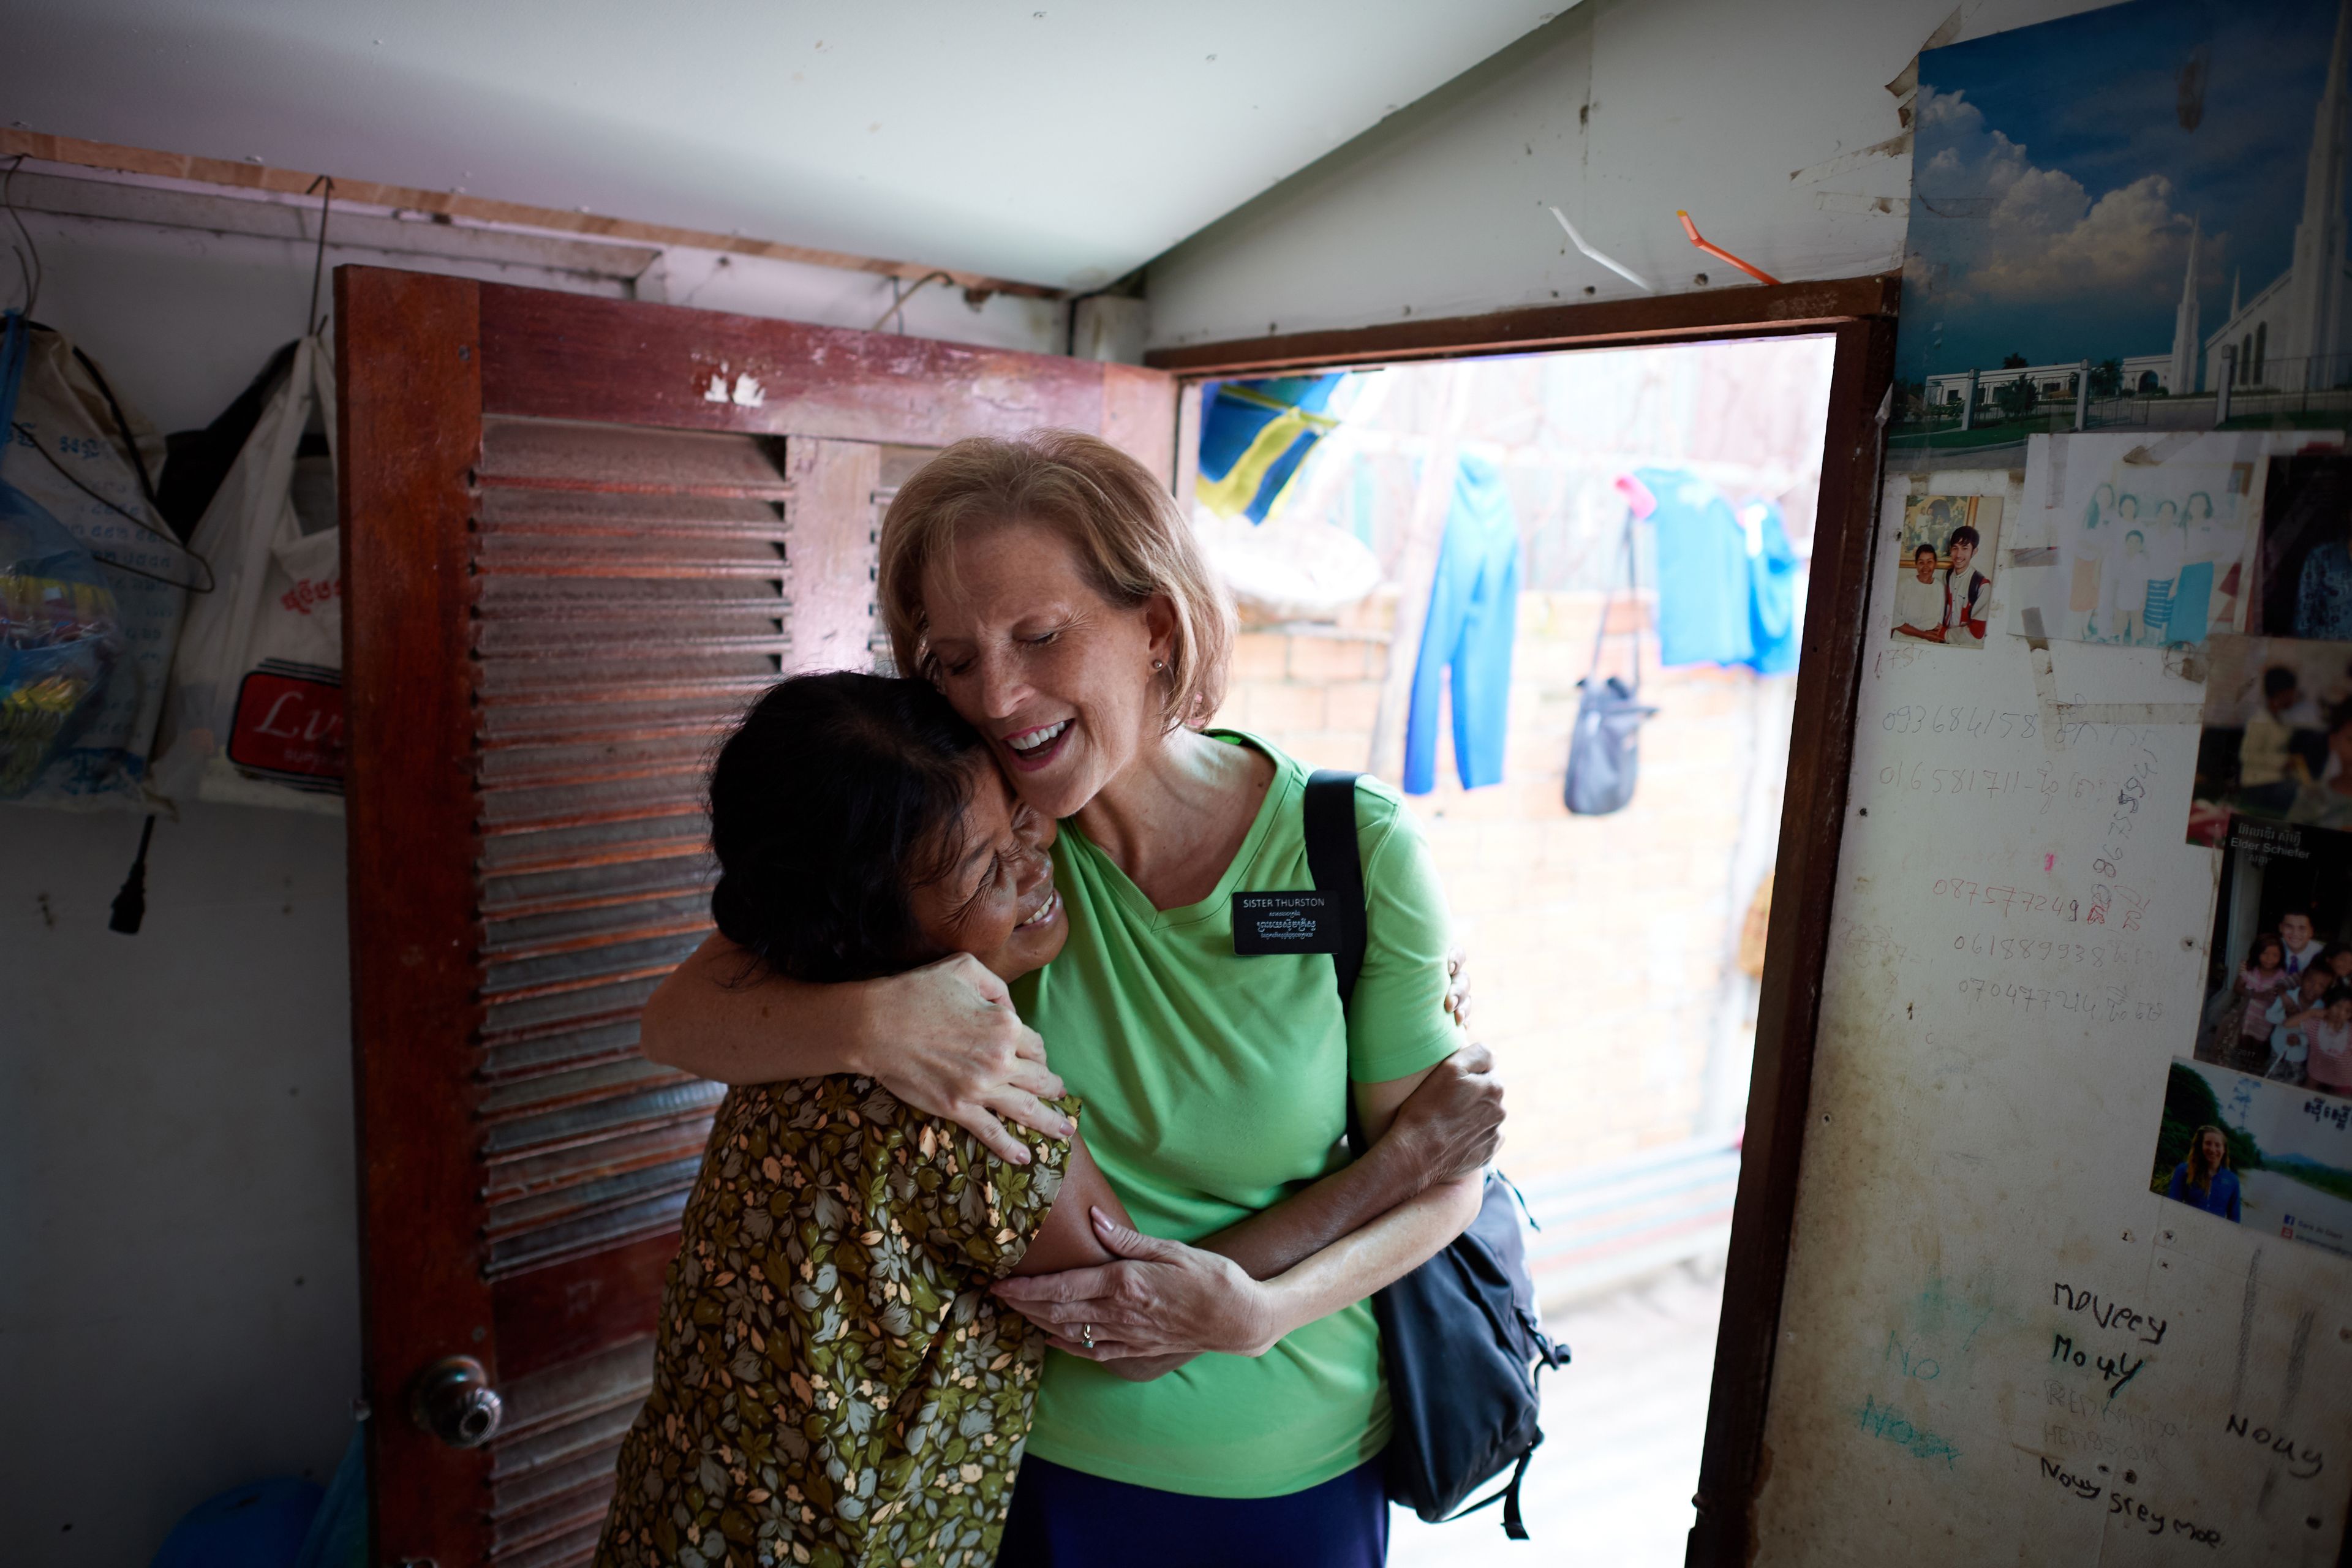 A senior sister missionary hugging a woman in Cambodia.